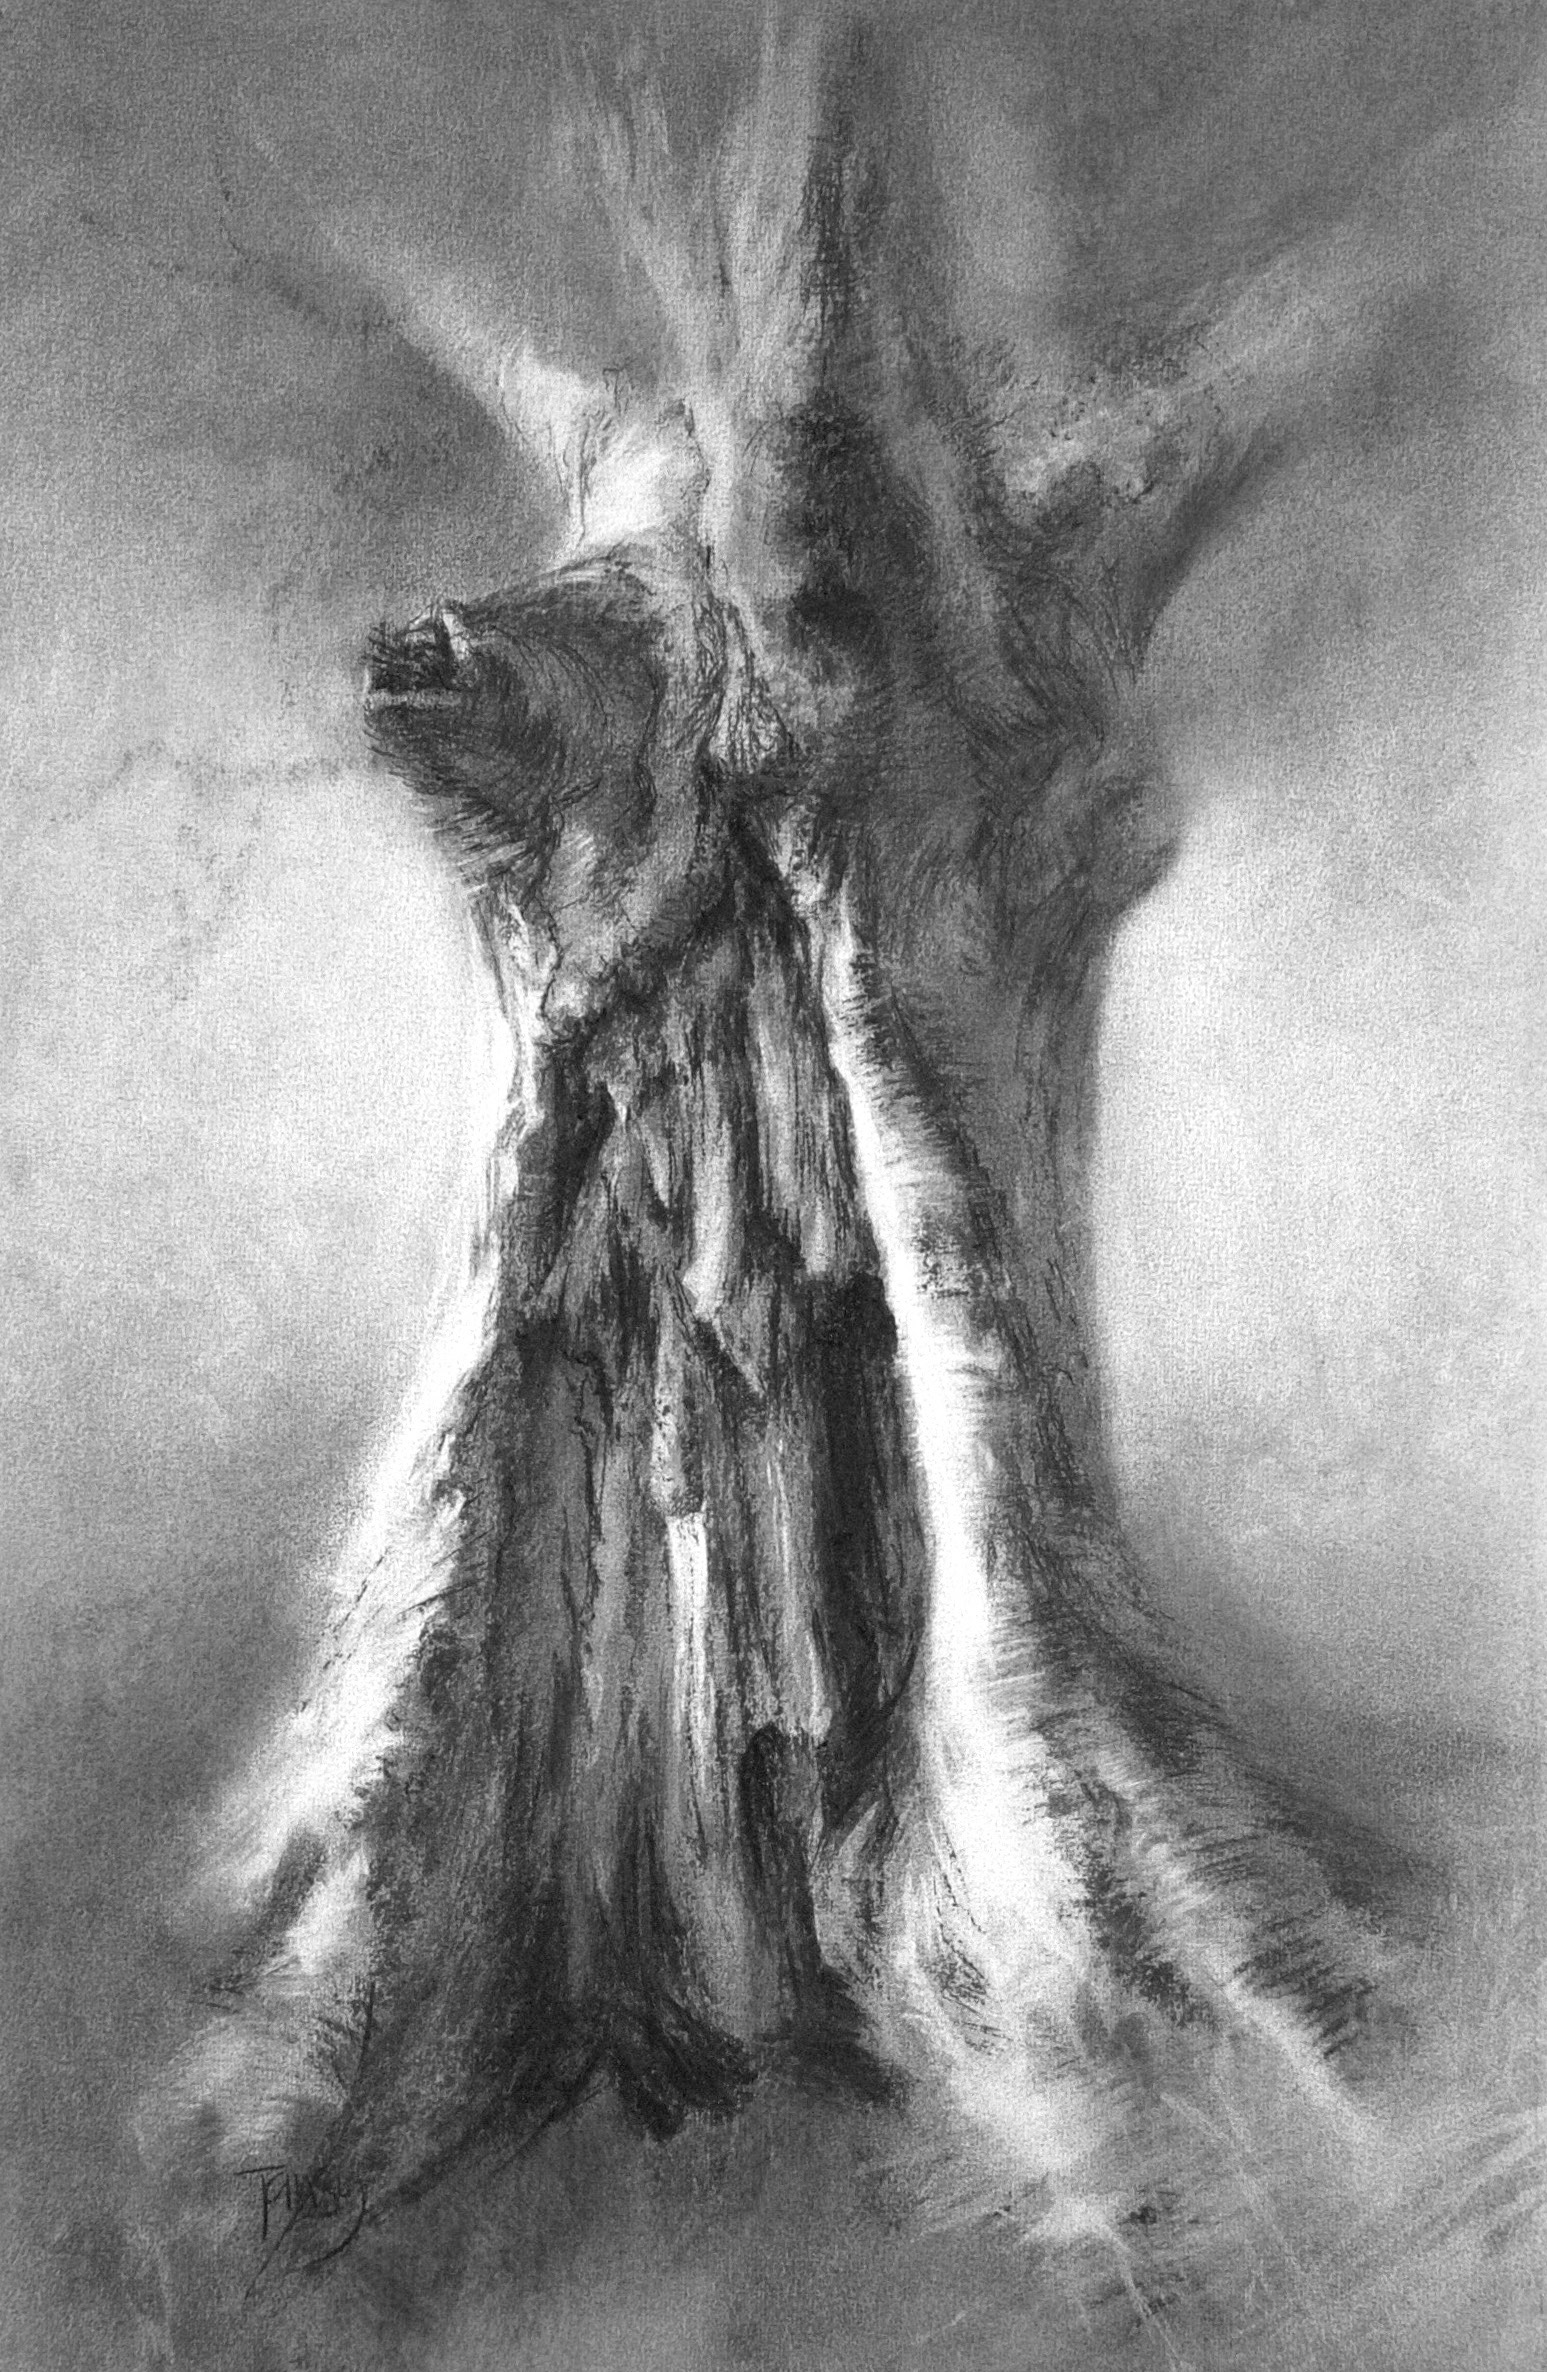 Calder hollow-hearted beech. Charcoal on paper.